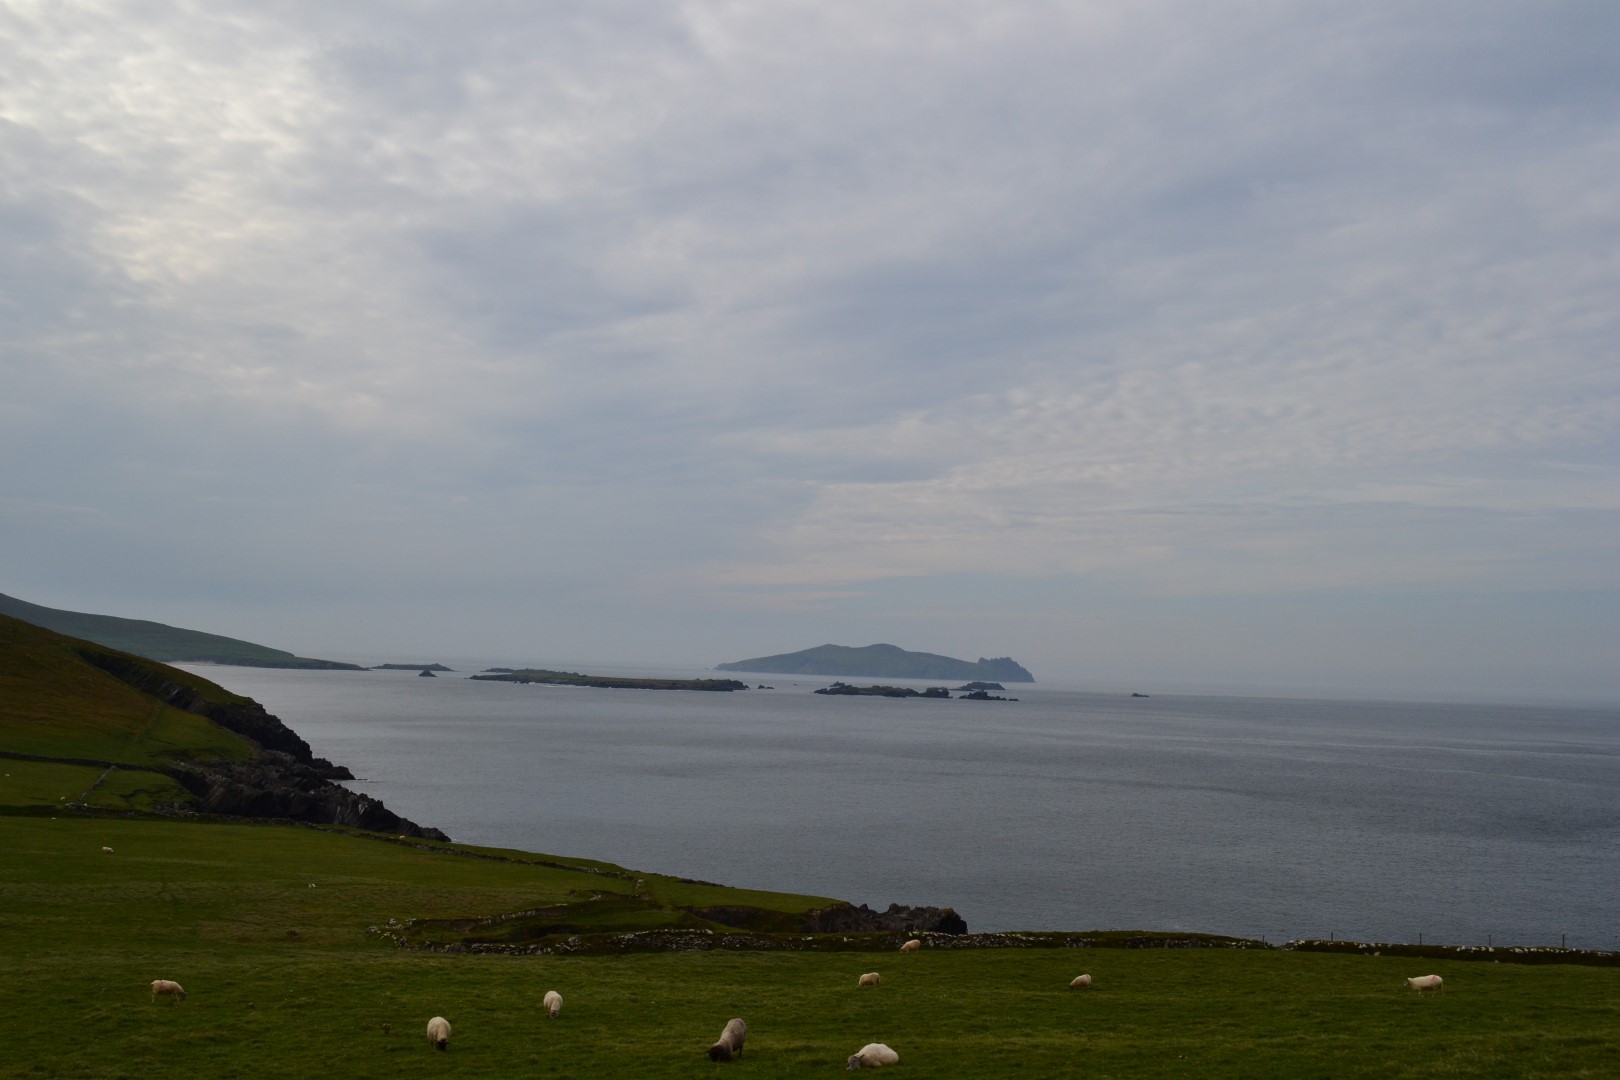 The Sleeping Giant in the island's distance: Dingle Peninsula Drive